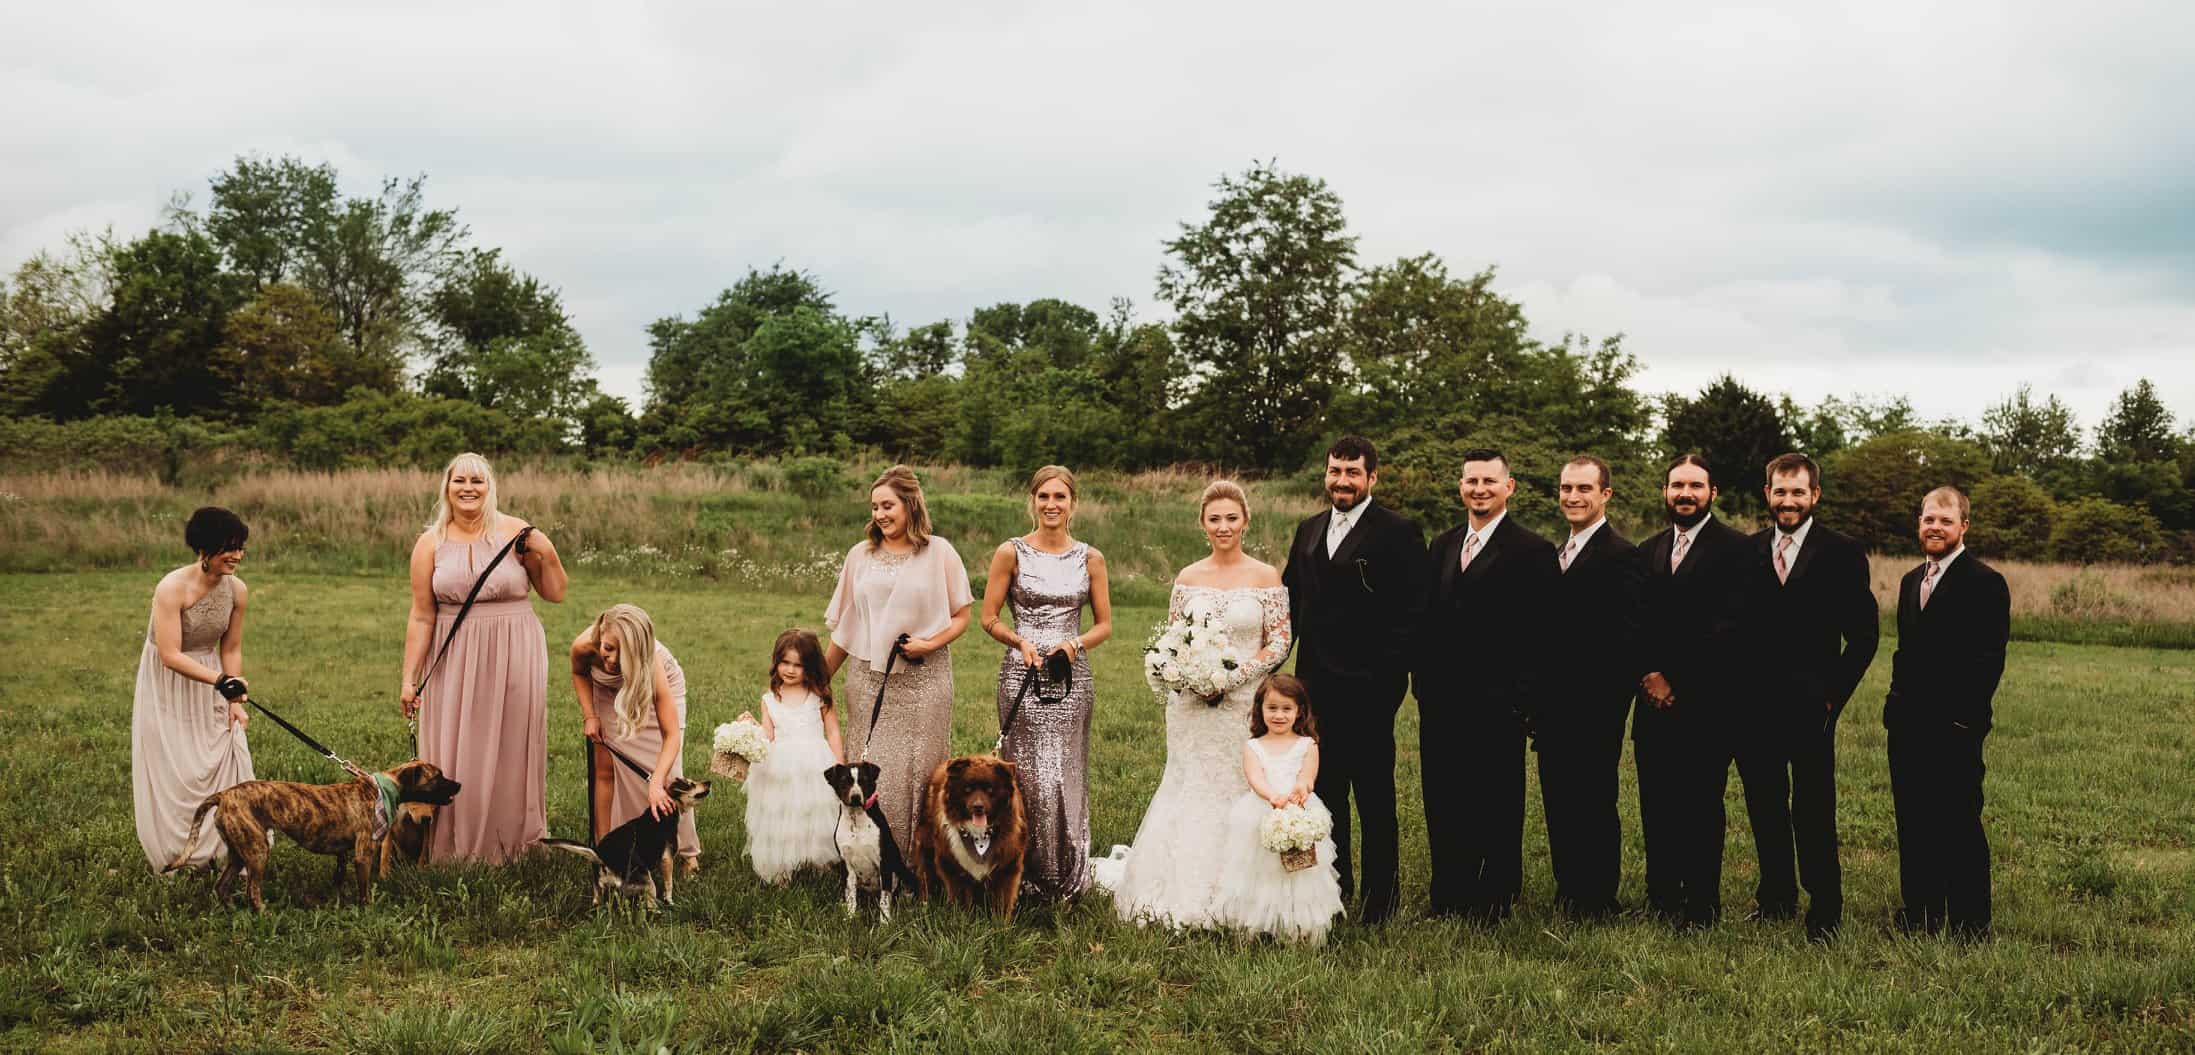 wedding couple with bridesmaids and groomsmen with shelter dogs